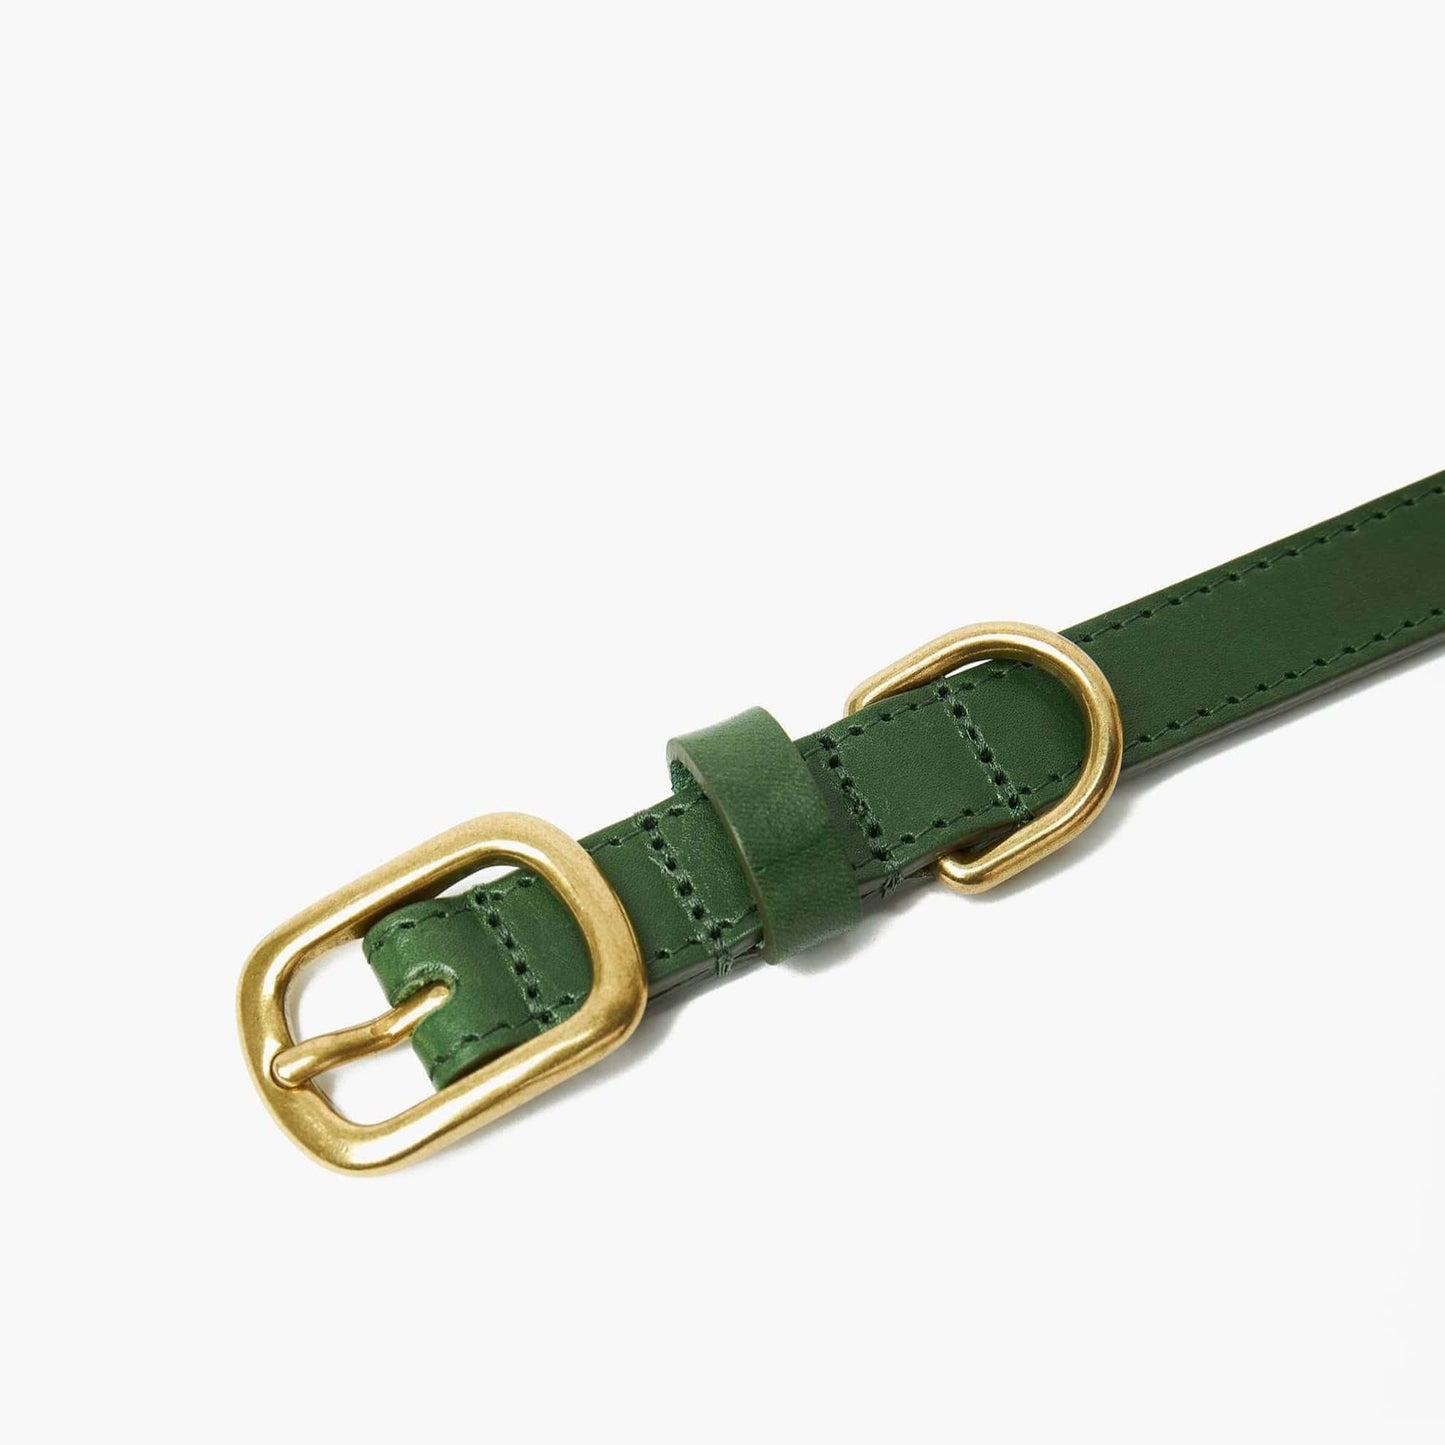 Emerald Green Leather Dog Collar with Gold Buckle